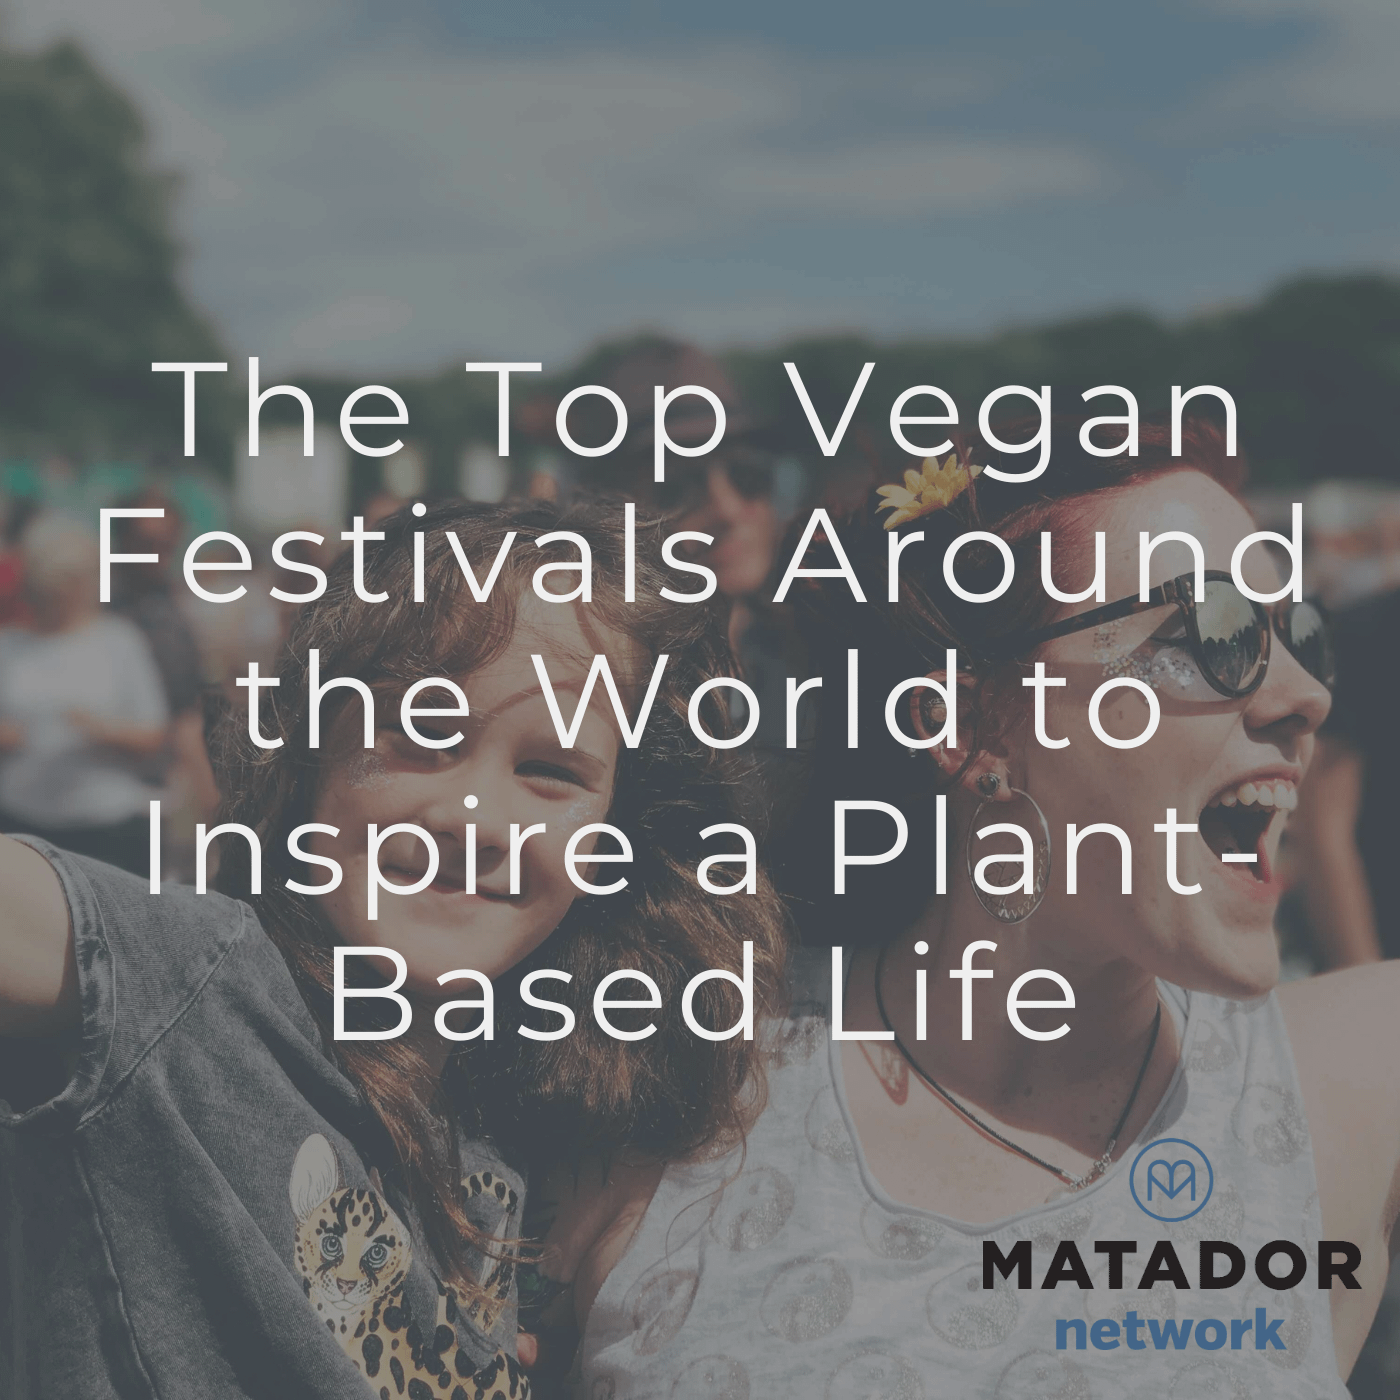 The Top Vegan Festivals Around the World to Inspire a PlantBased Life